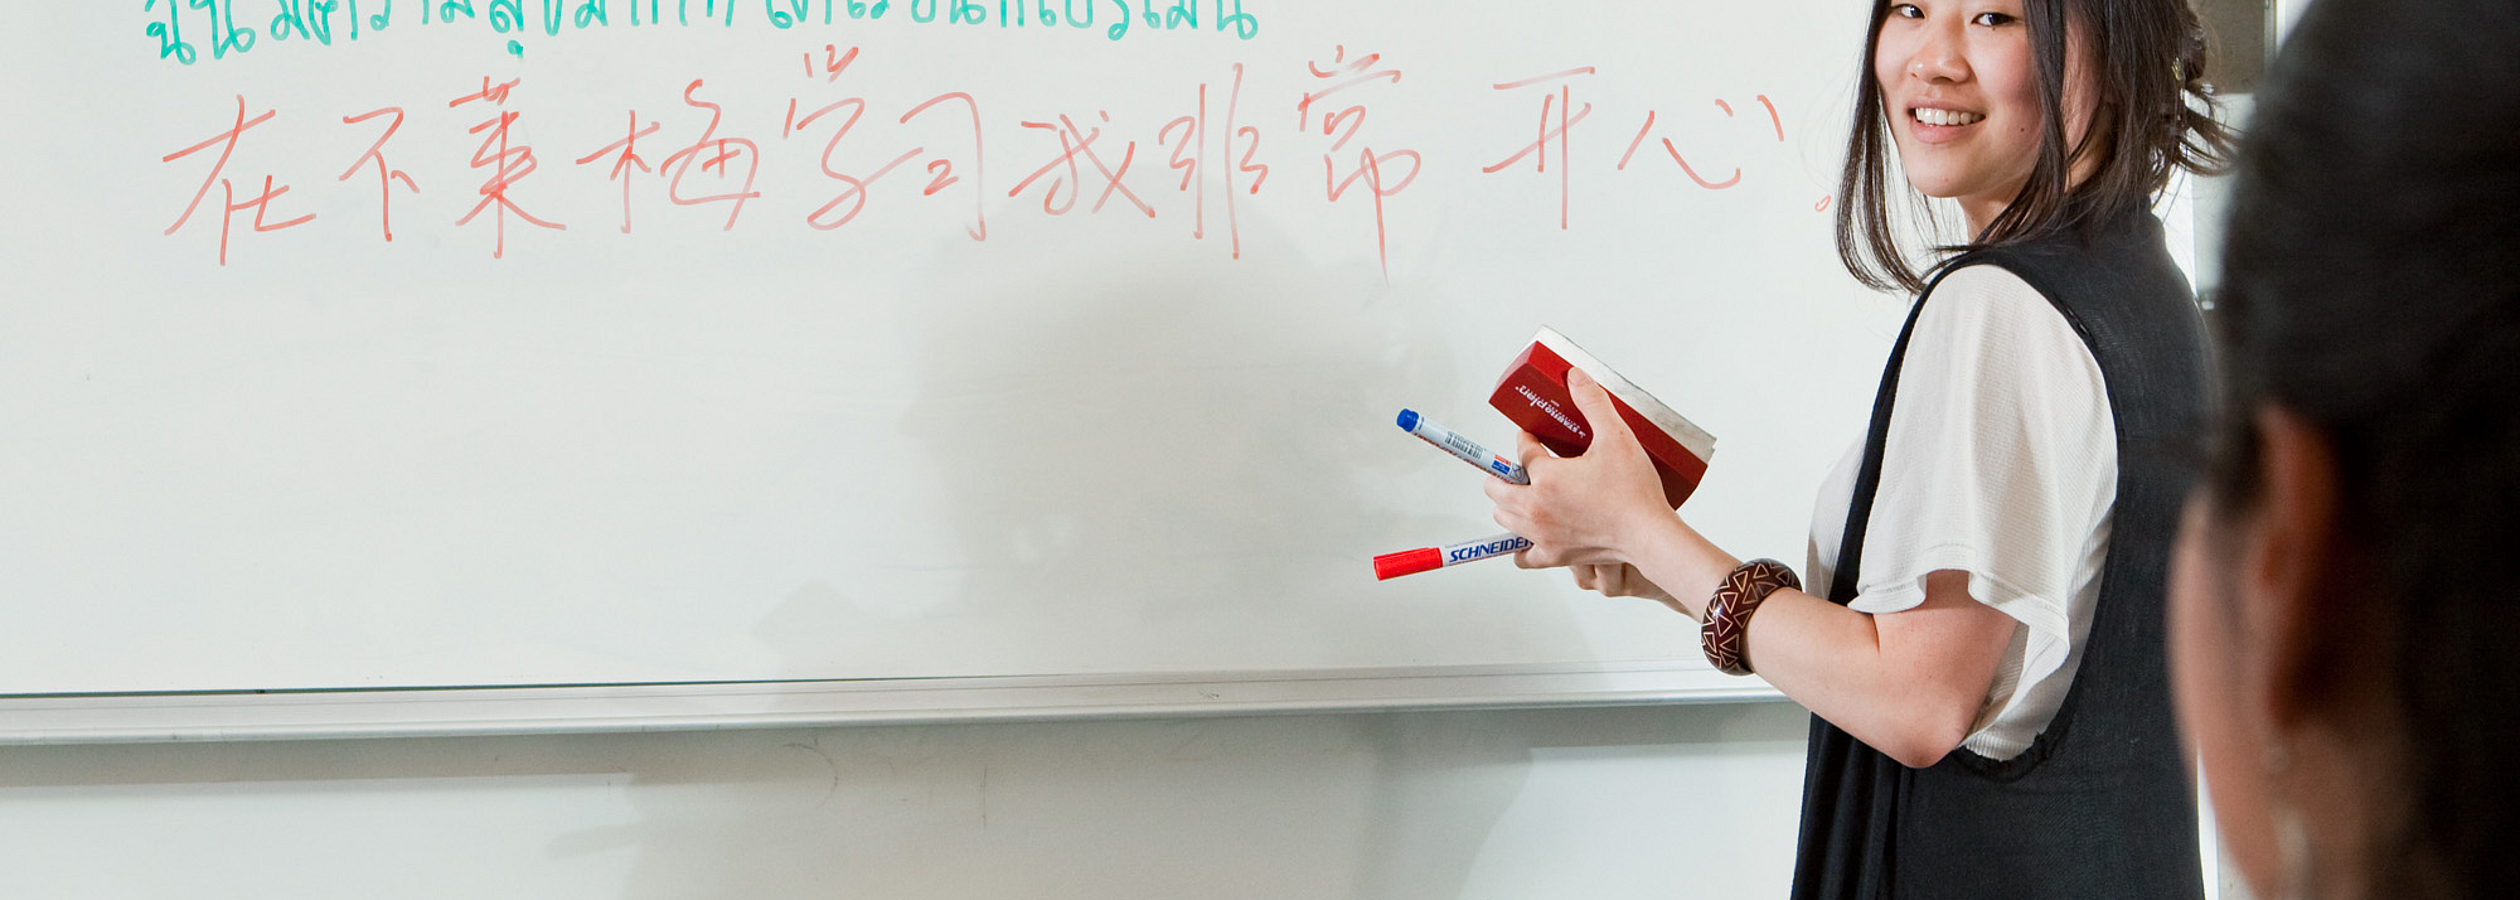 A person writes in different languages on a whiteboard.